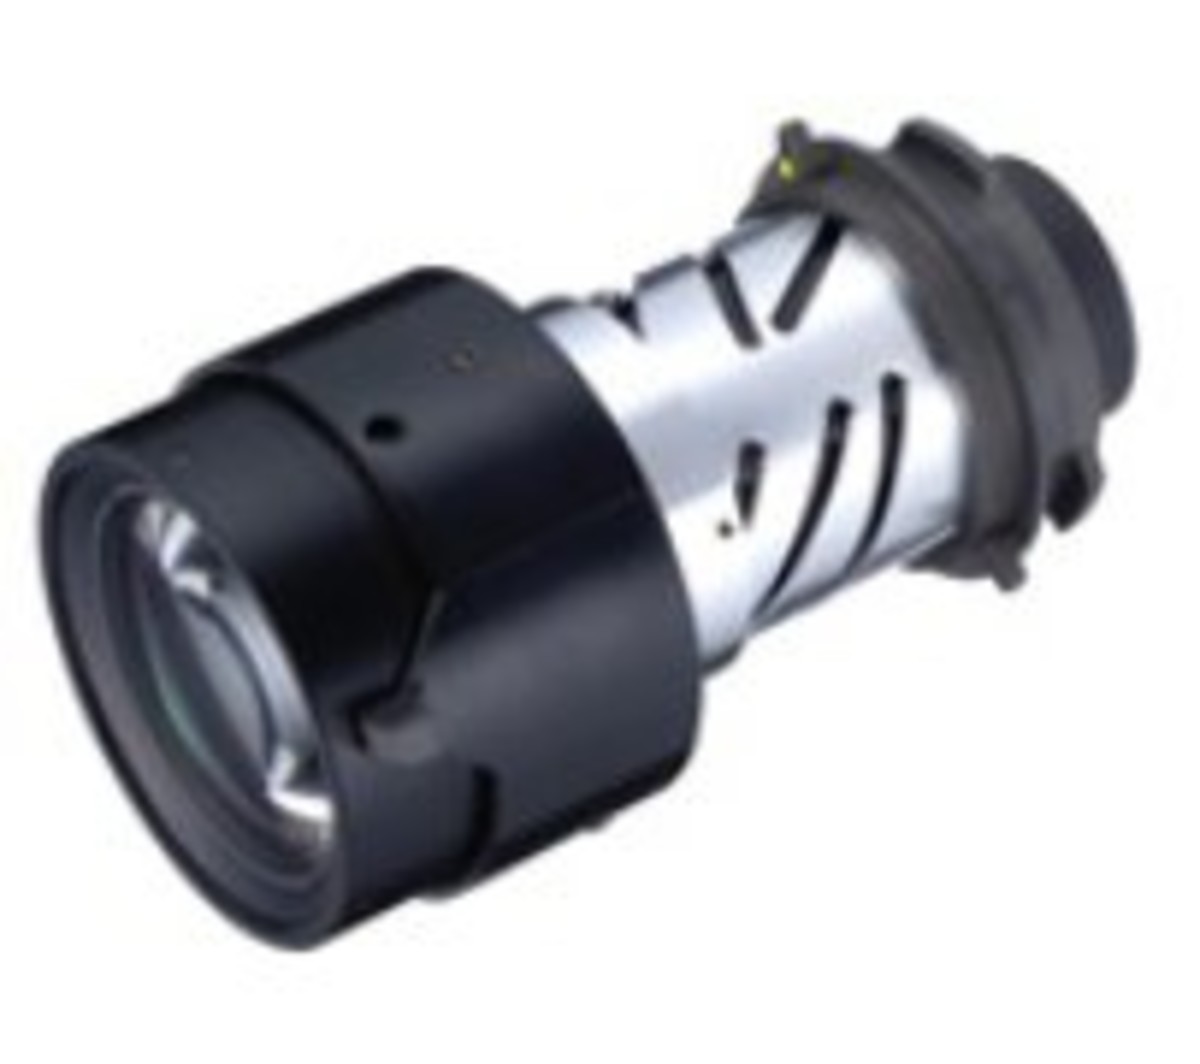 NP15ZL Long Zoom Lens for PA series